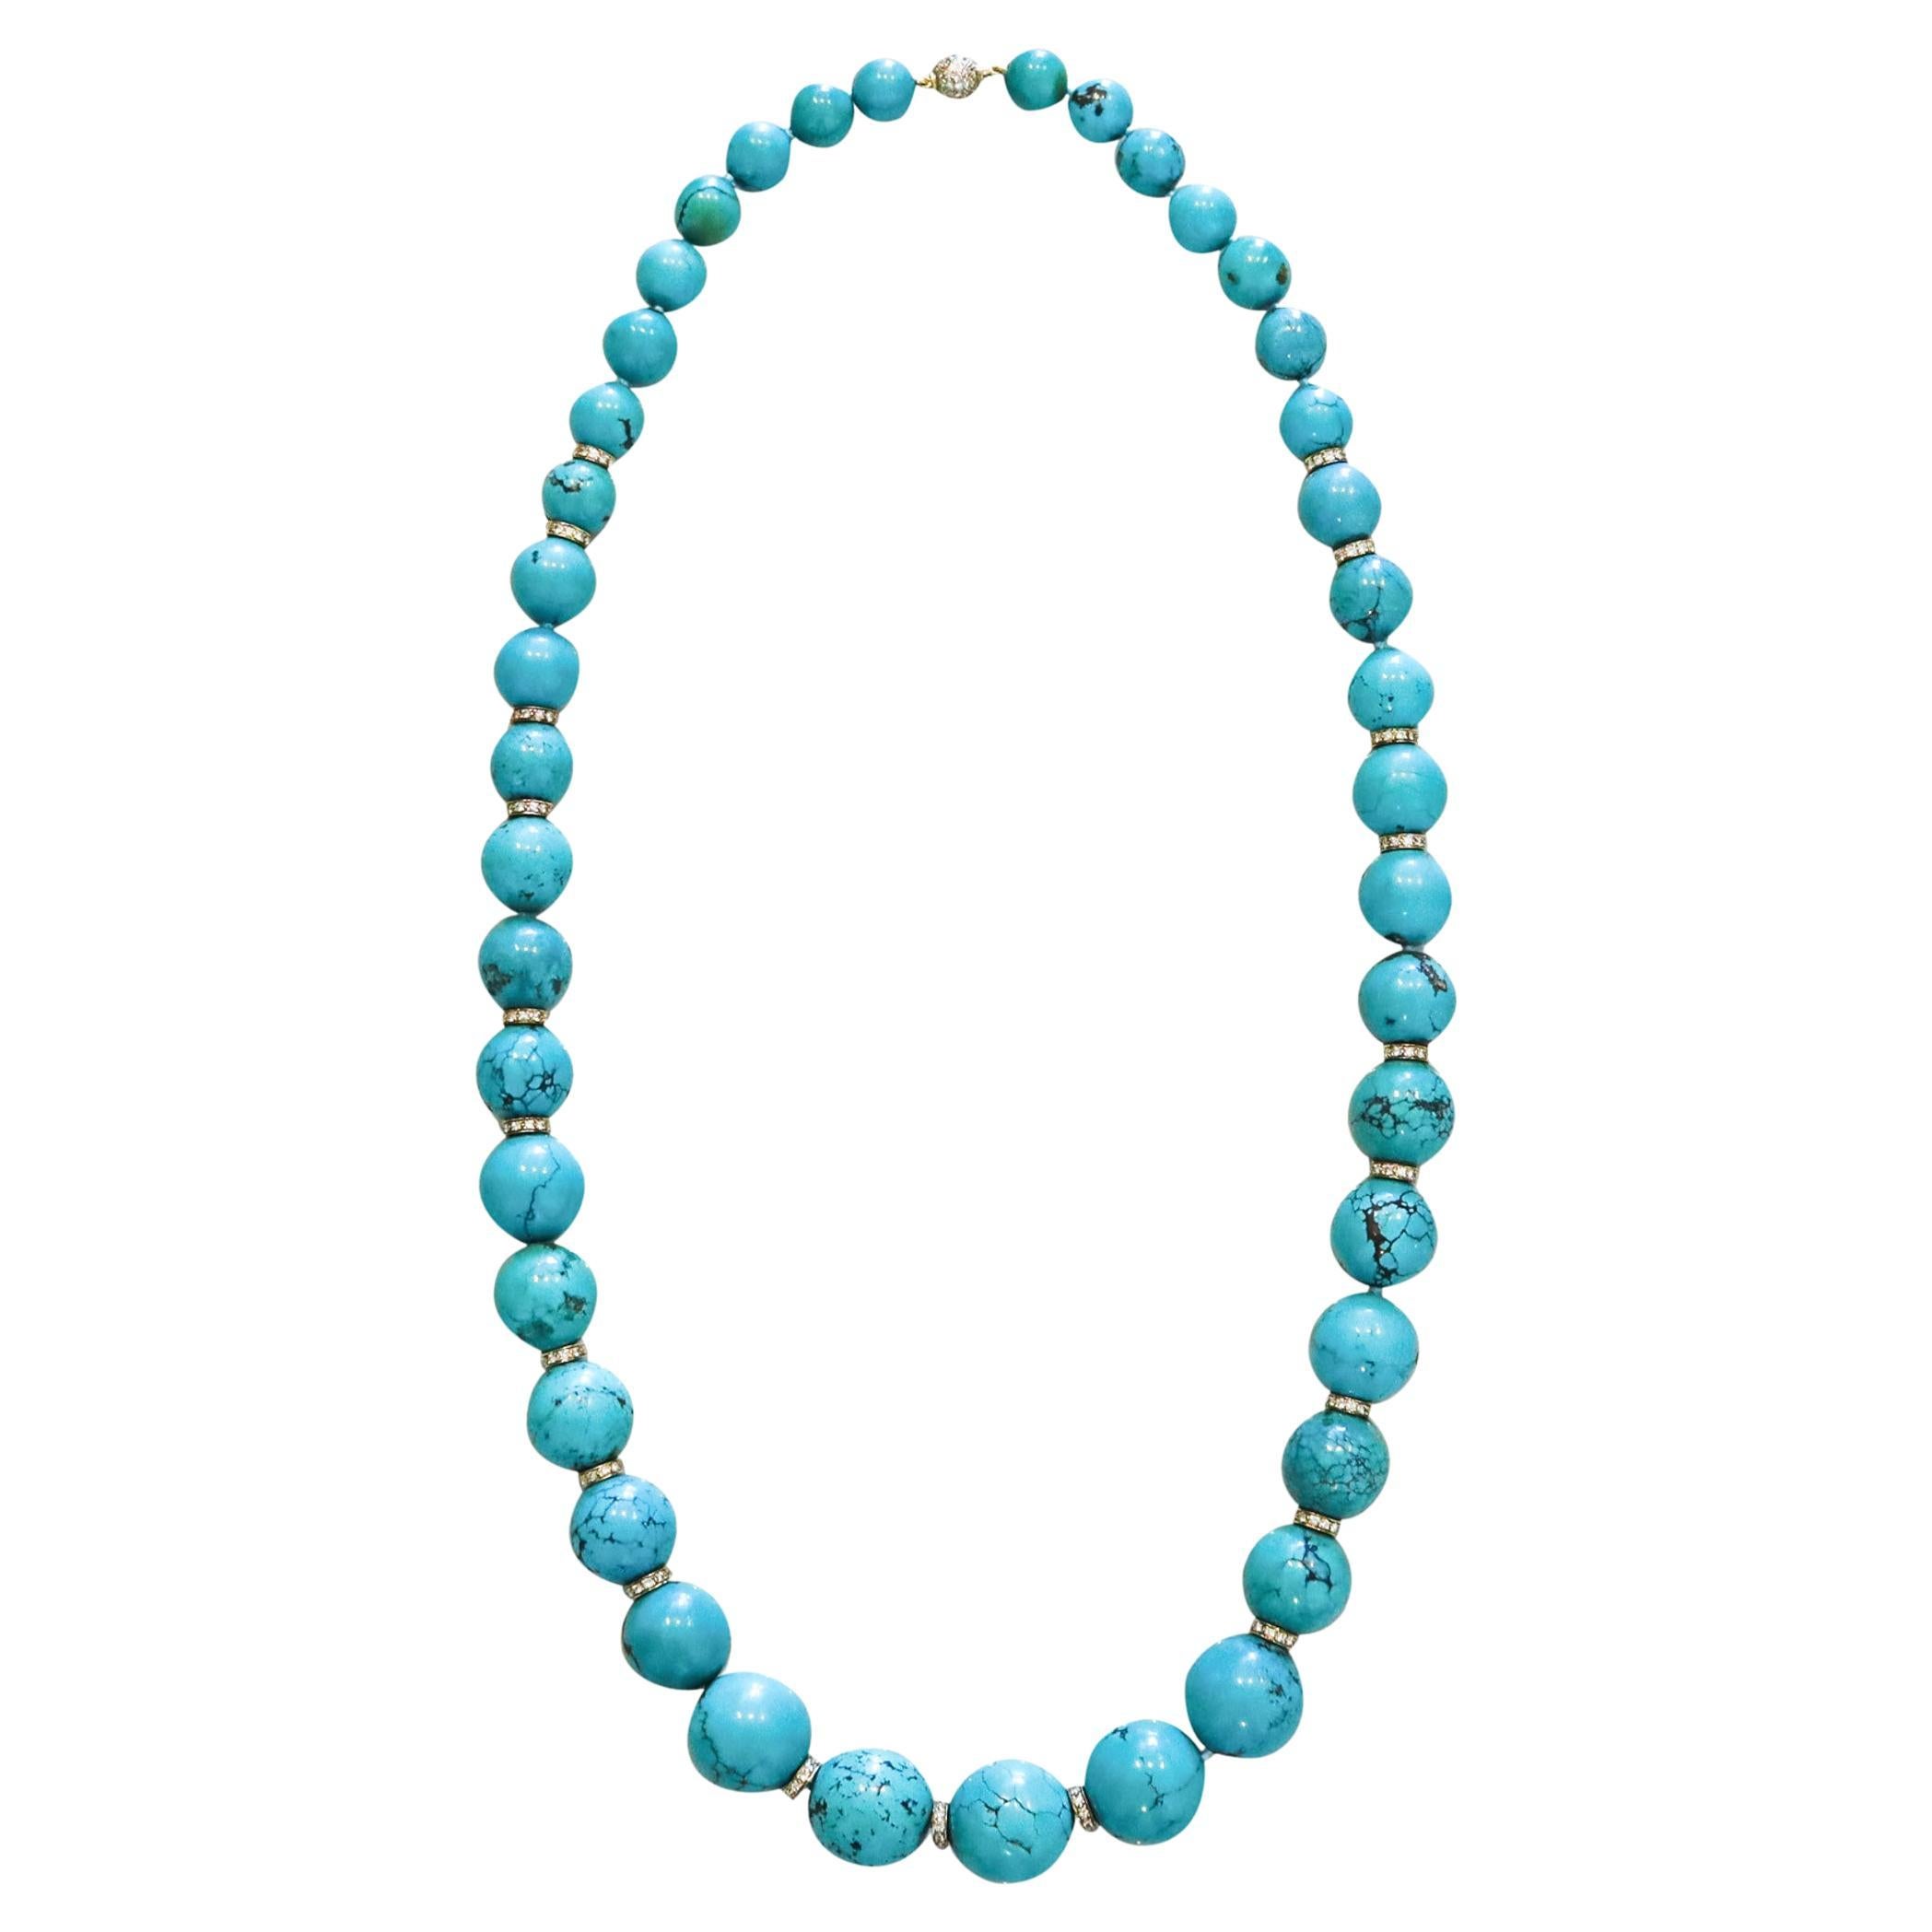 Nani Cesare Modernist Turquoise Long Necklace 18Kt Gold With 14.06 Ctw Diamonds For Sale